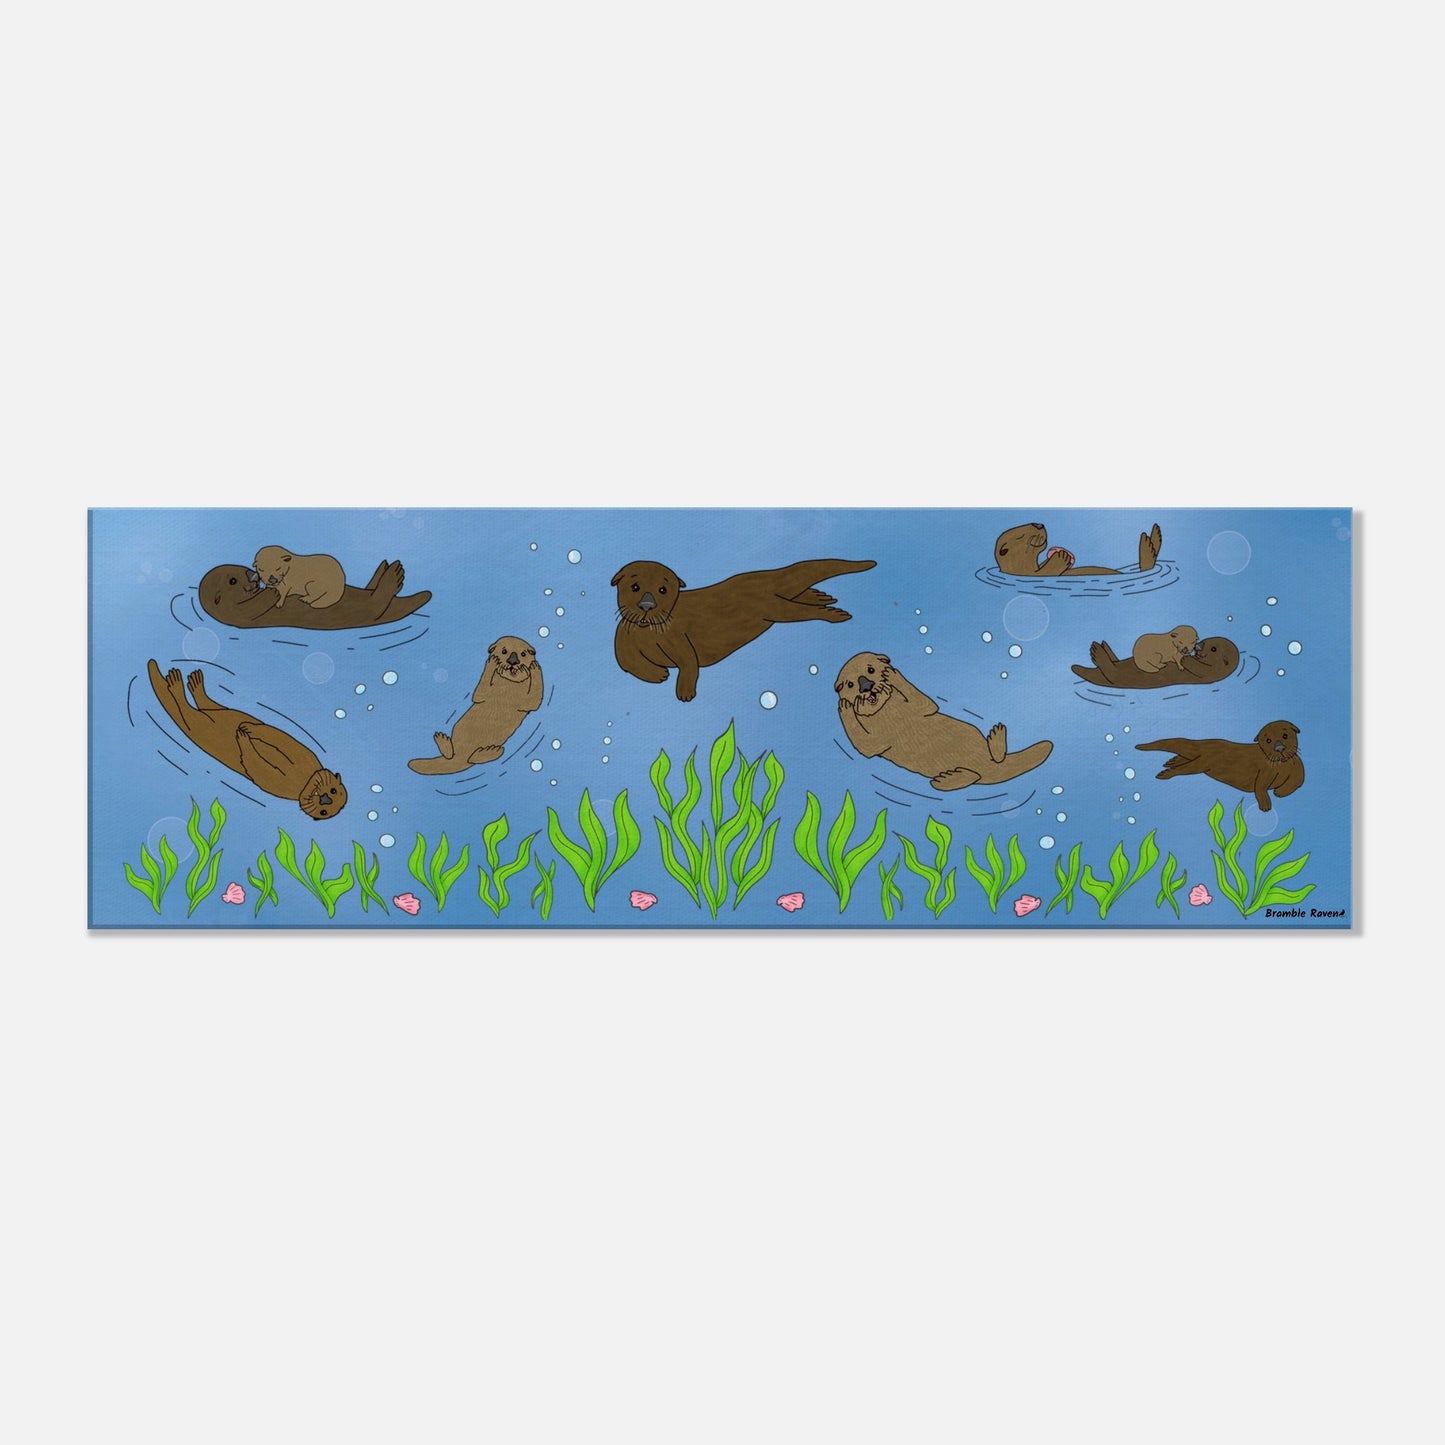 12 by 36 inch slim canvas wall art print of sea otters swimming along the seabed. Hanging hardware included for easy installation.